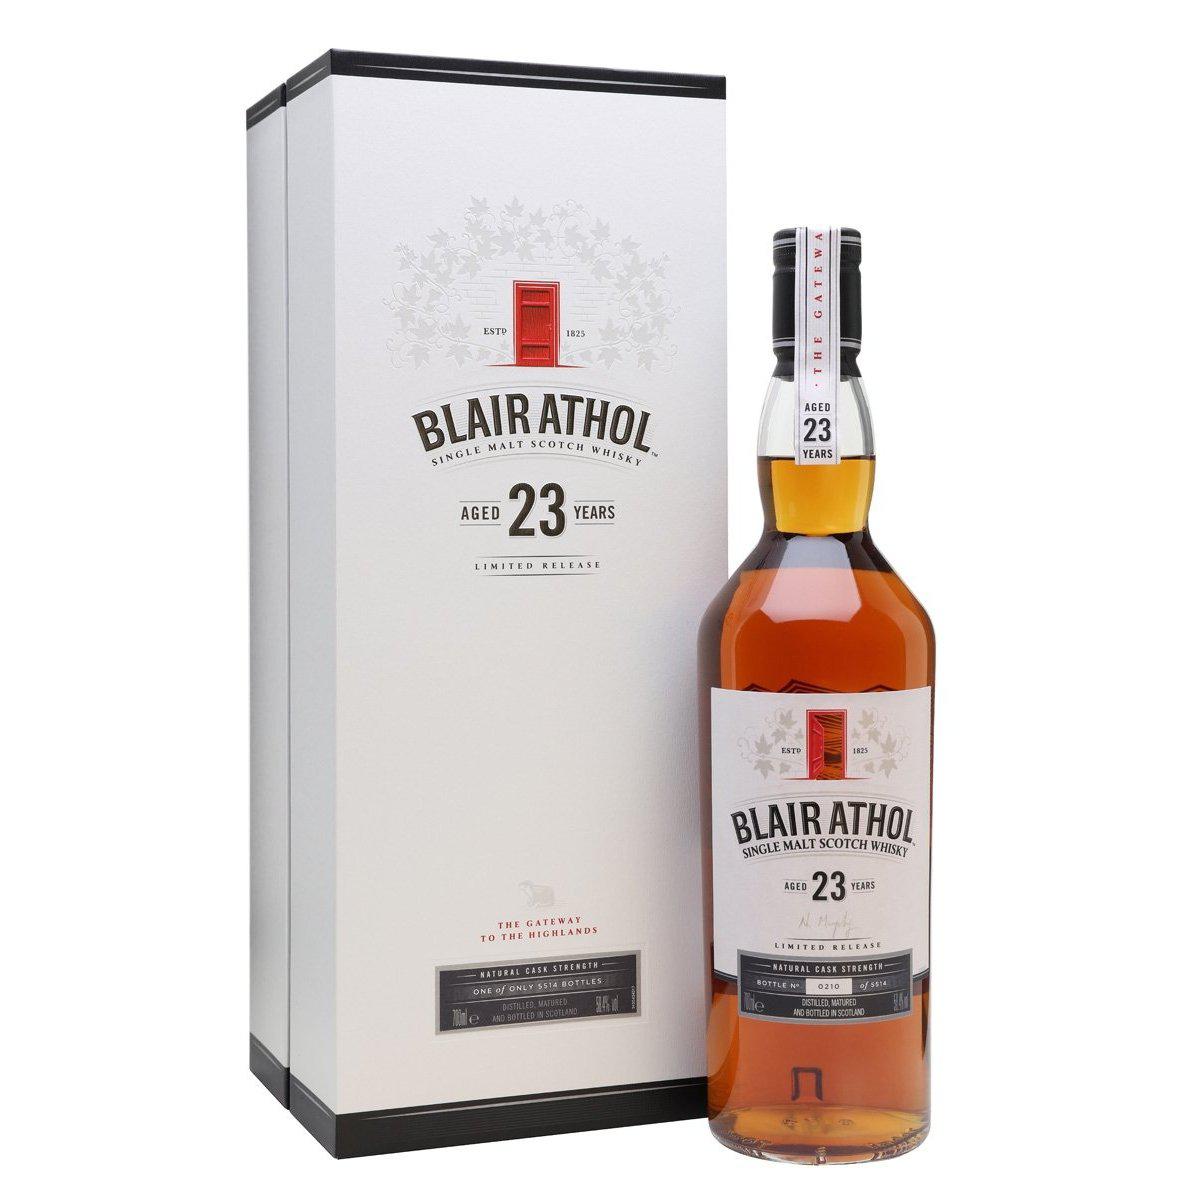 1993 Blair Athol 23 Year Old (Special Release 2017) Cask Strength Single Malt Scotch Whisky 700ml